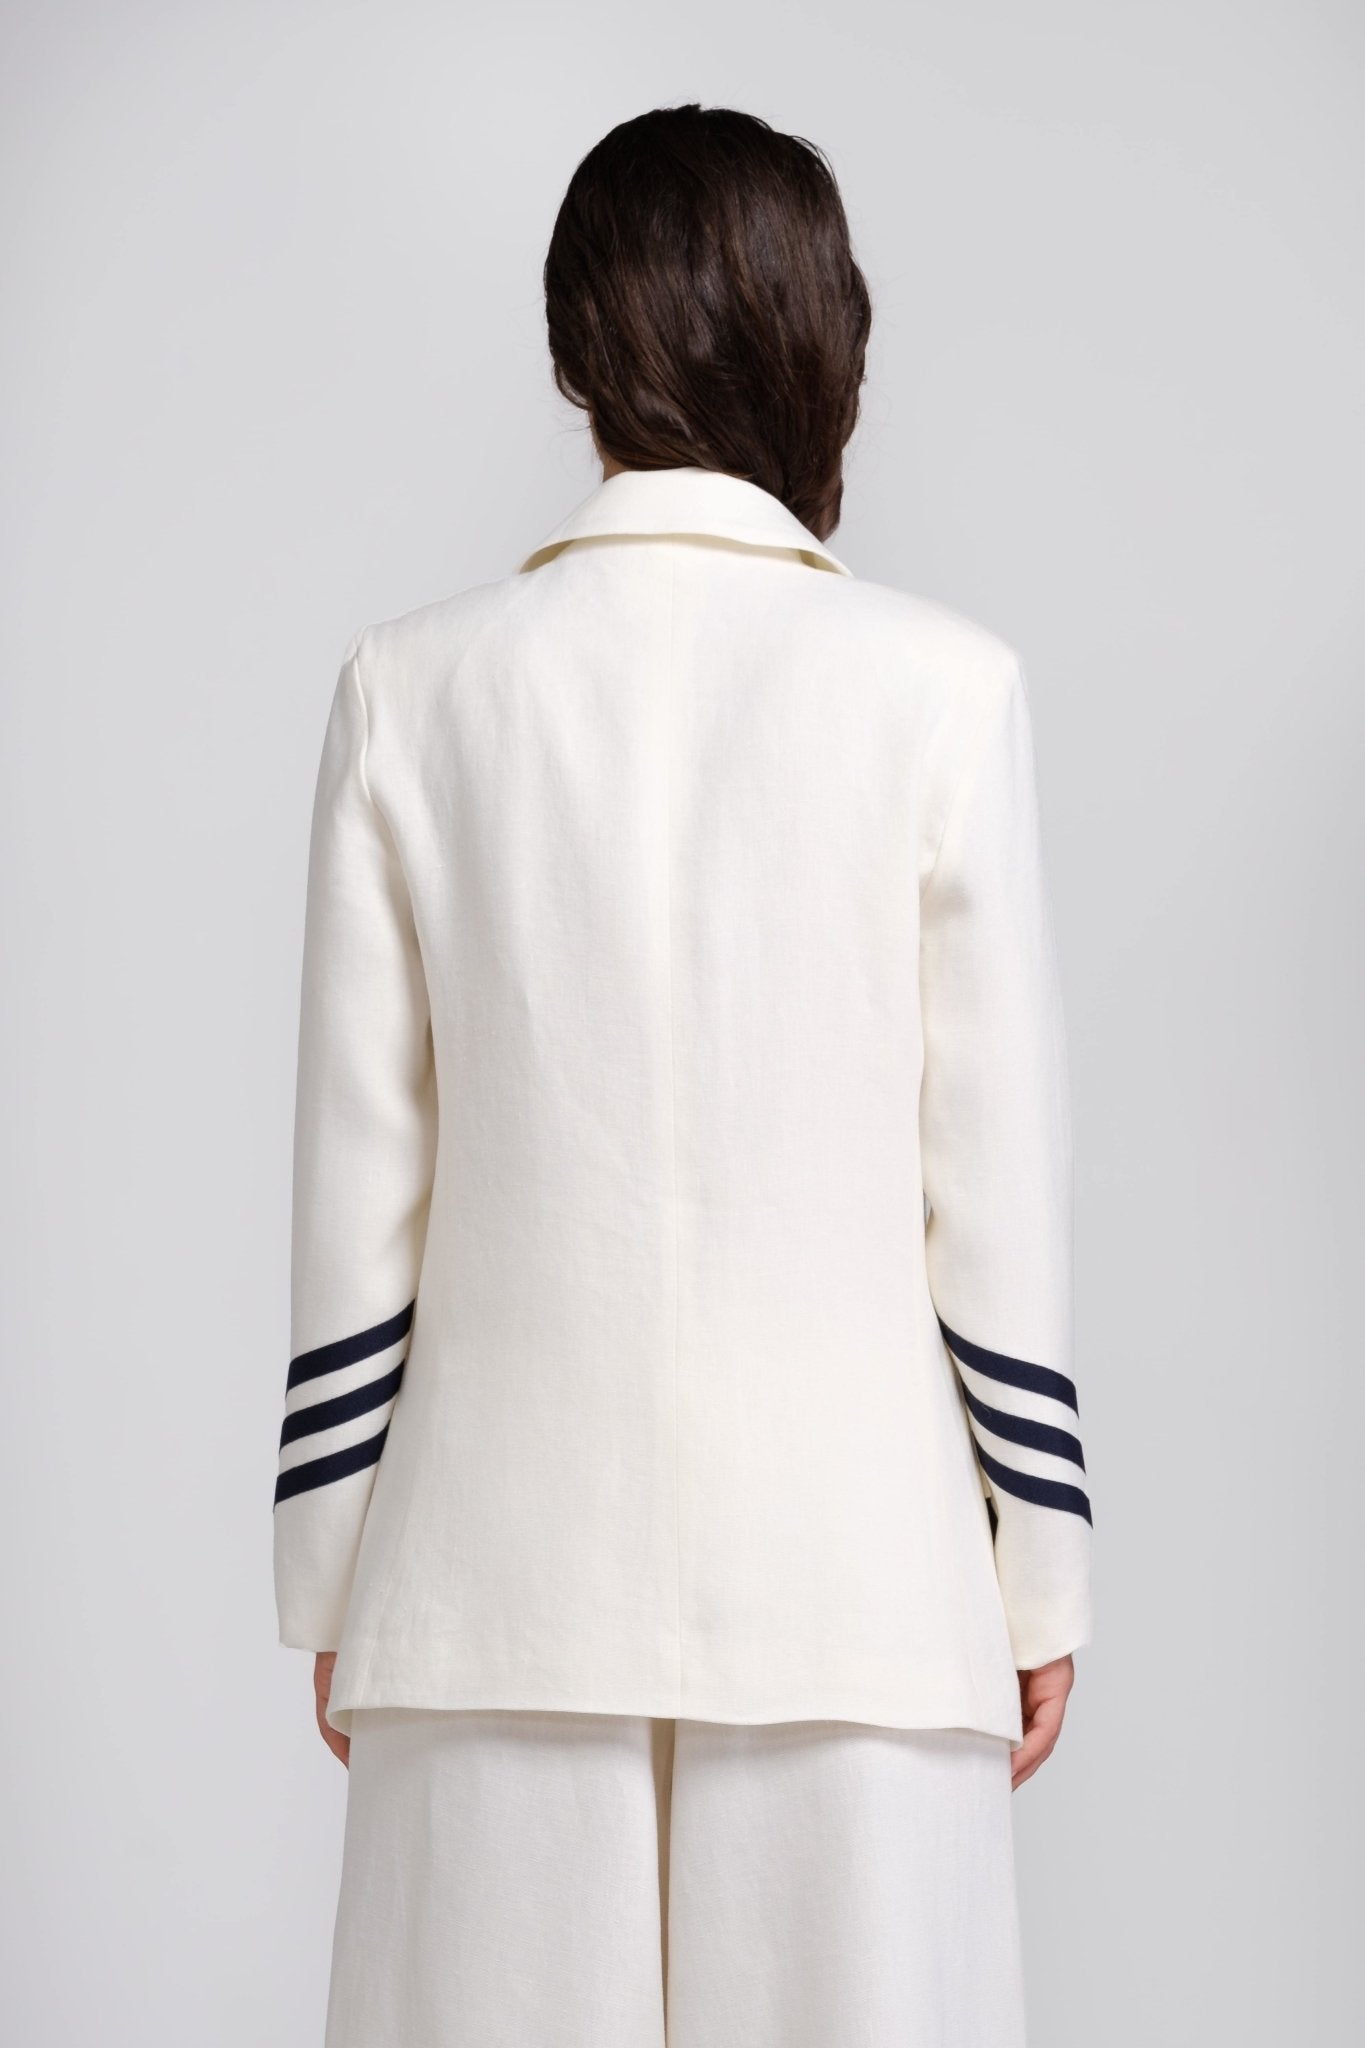 Natural Hemp Jacket with Sleeve Details - The Clothing LoungeTrame di Stile